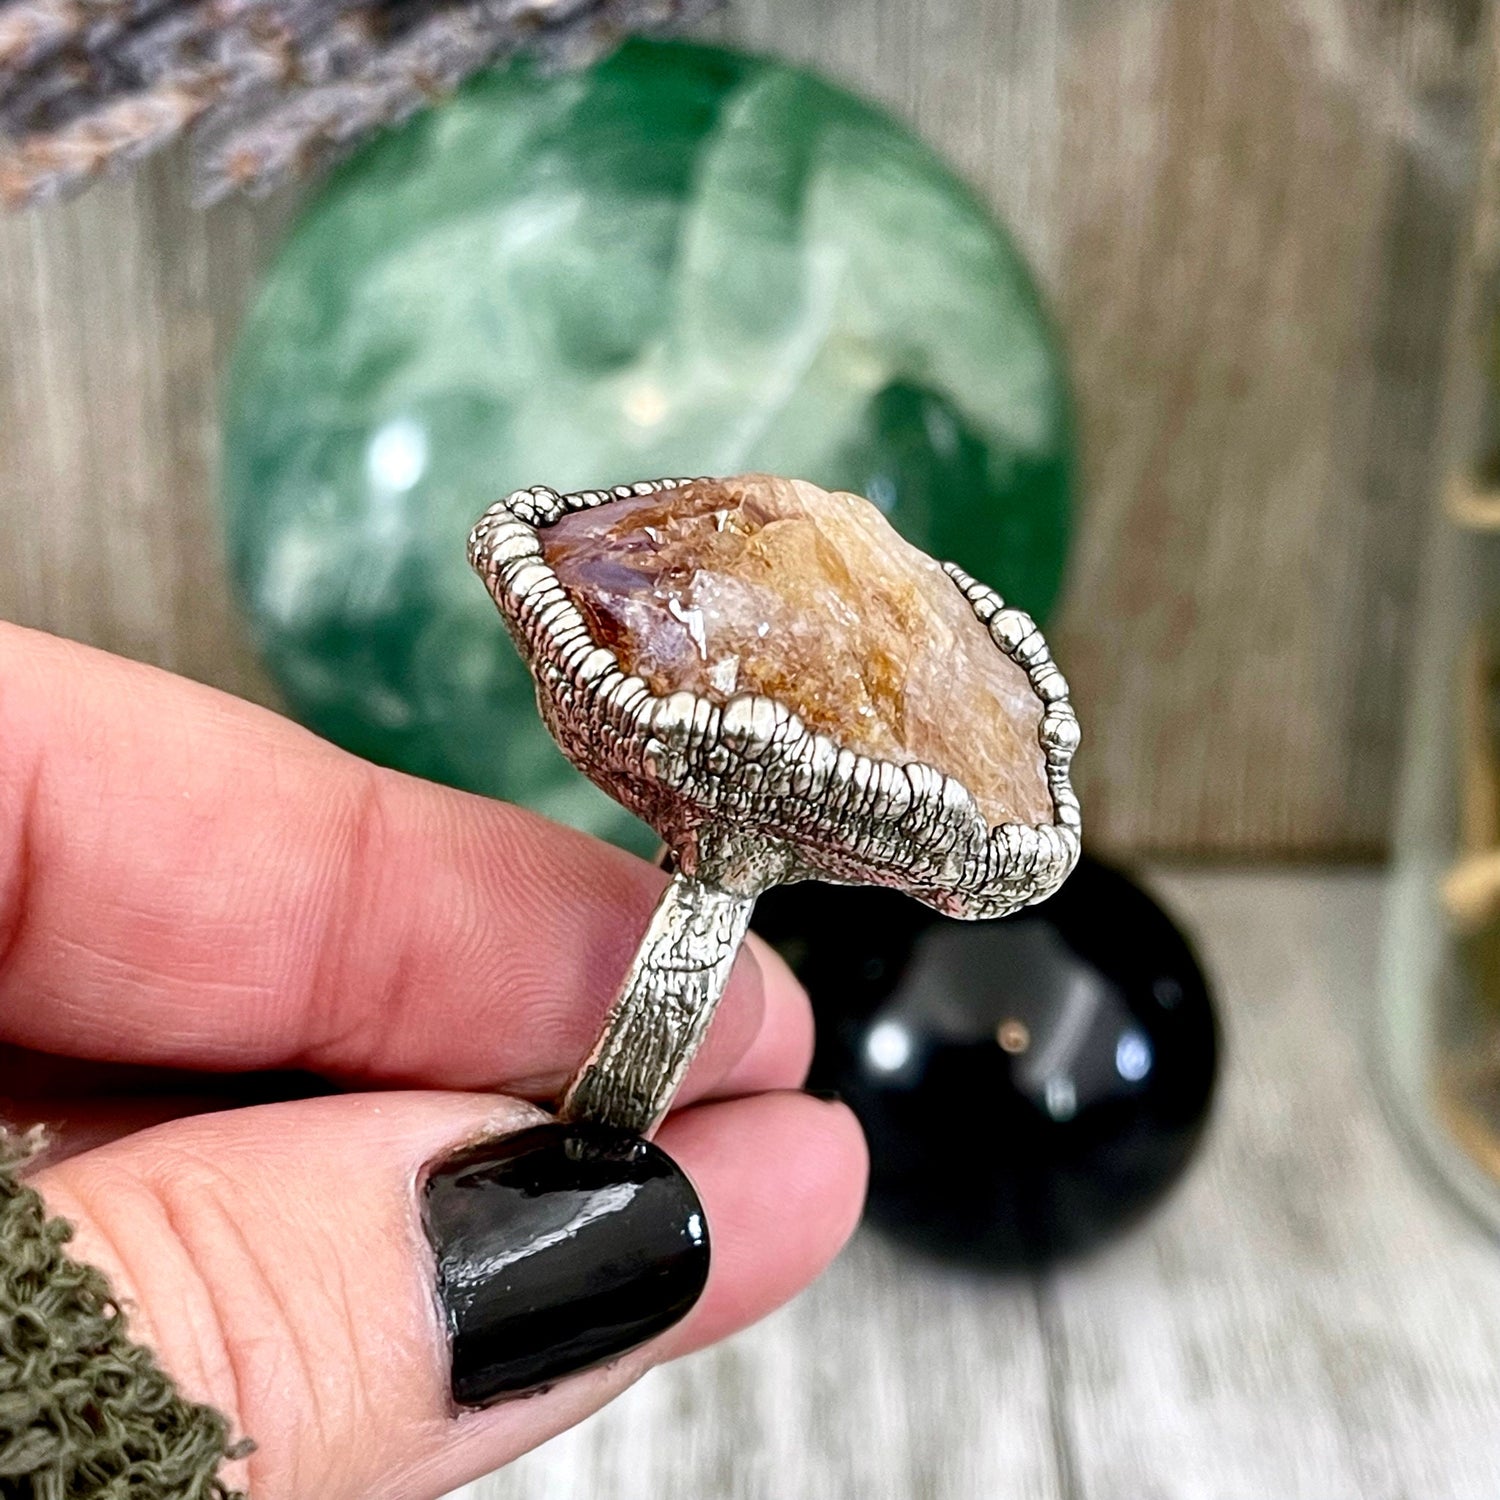 Size 8.5 Raw Citrine Crystal Point Ring Set in Fine Silver / Foxlark Collection - One of a Kind / Big Crystal Ring Witchy Jewelry